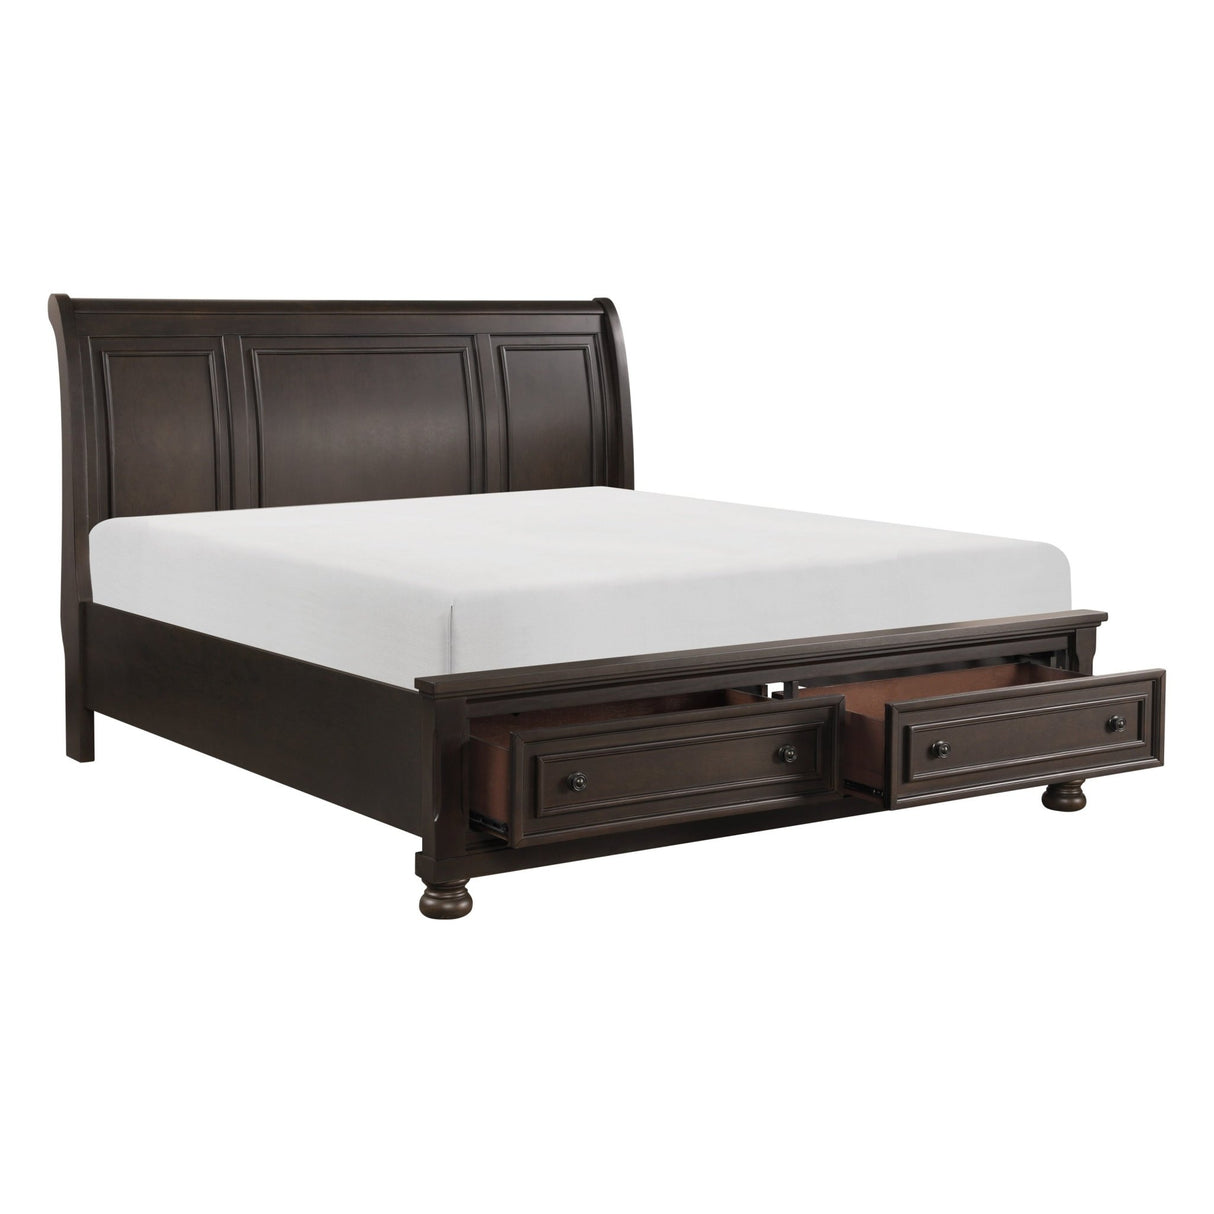 1pc Queen Size Platform Bed with Footboard Storage Drawers Traditional Design Bedroom Furniture - Home Elegance USA